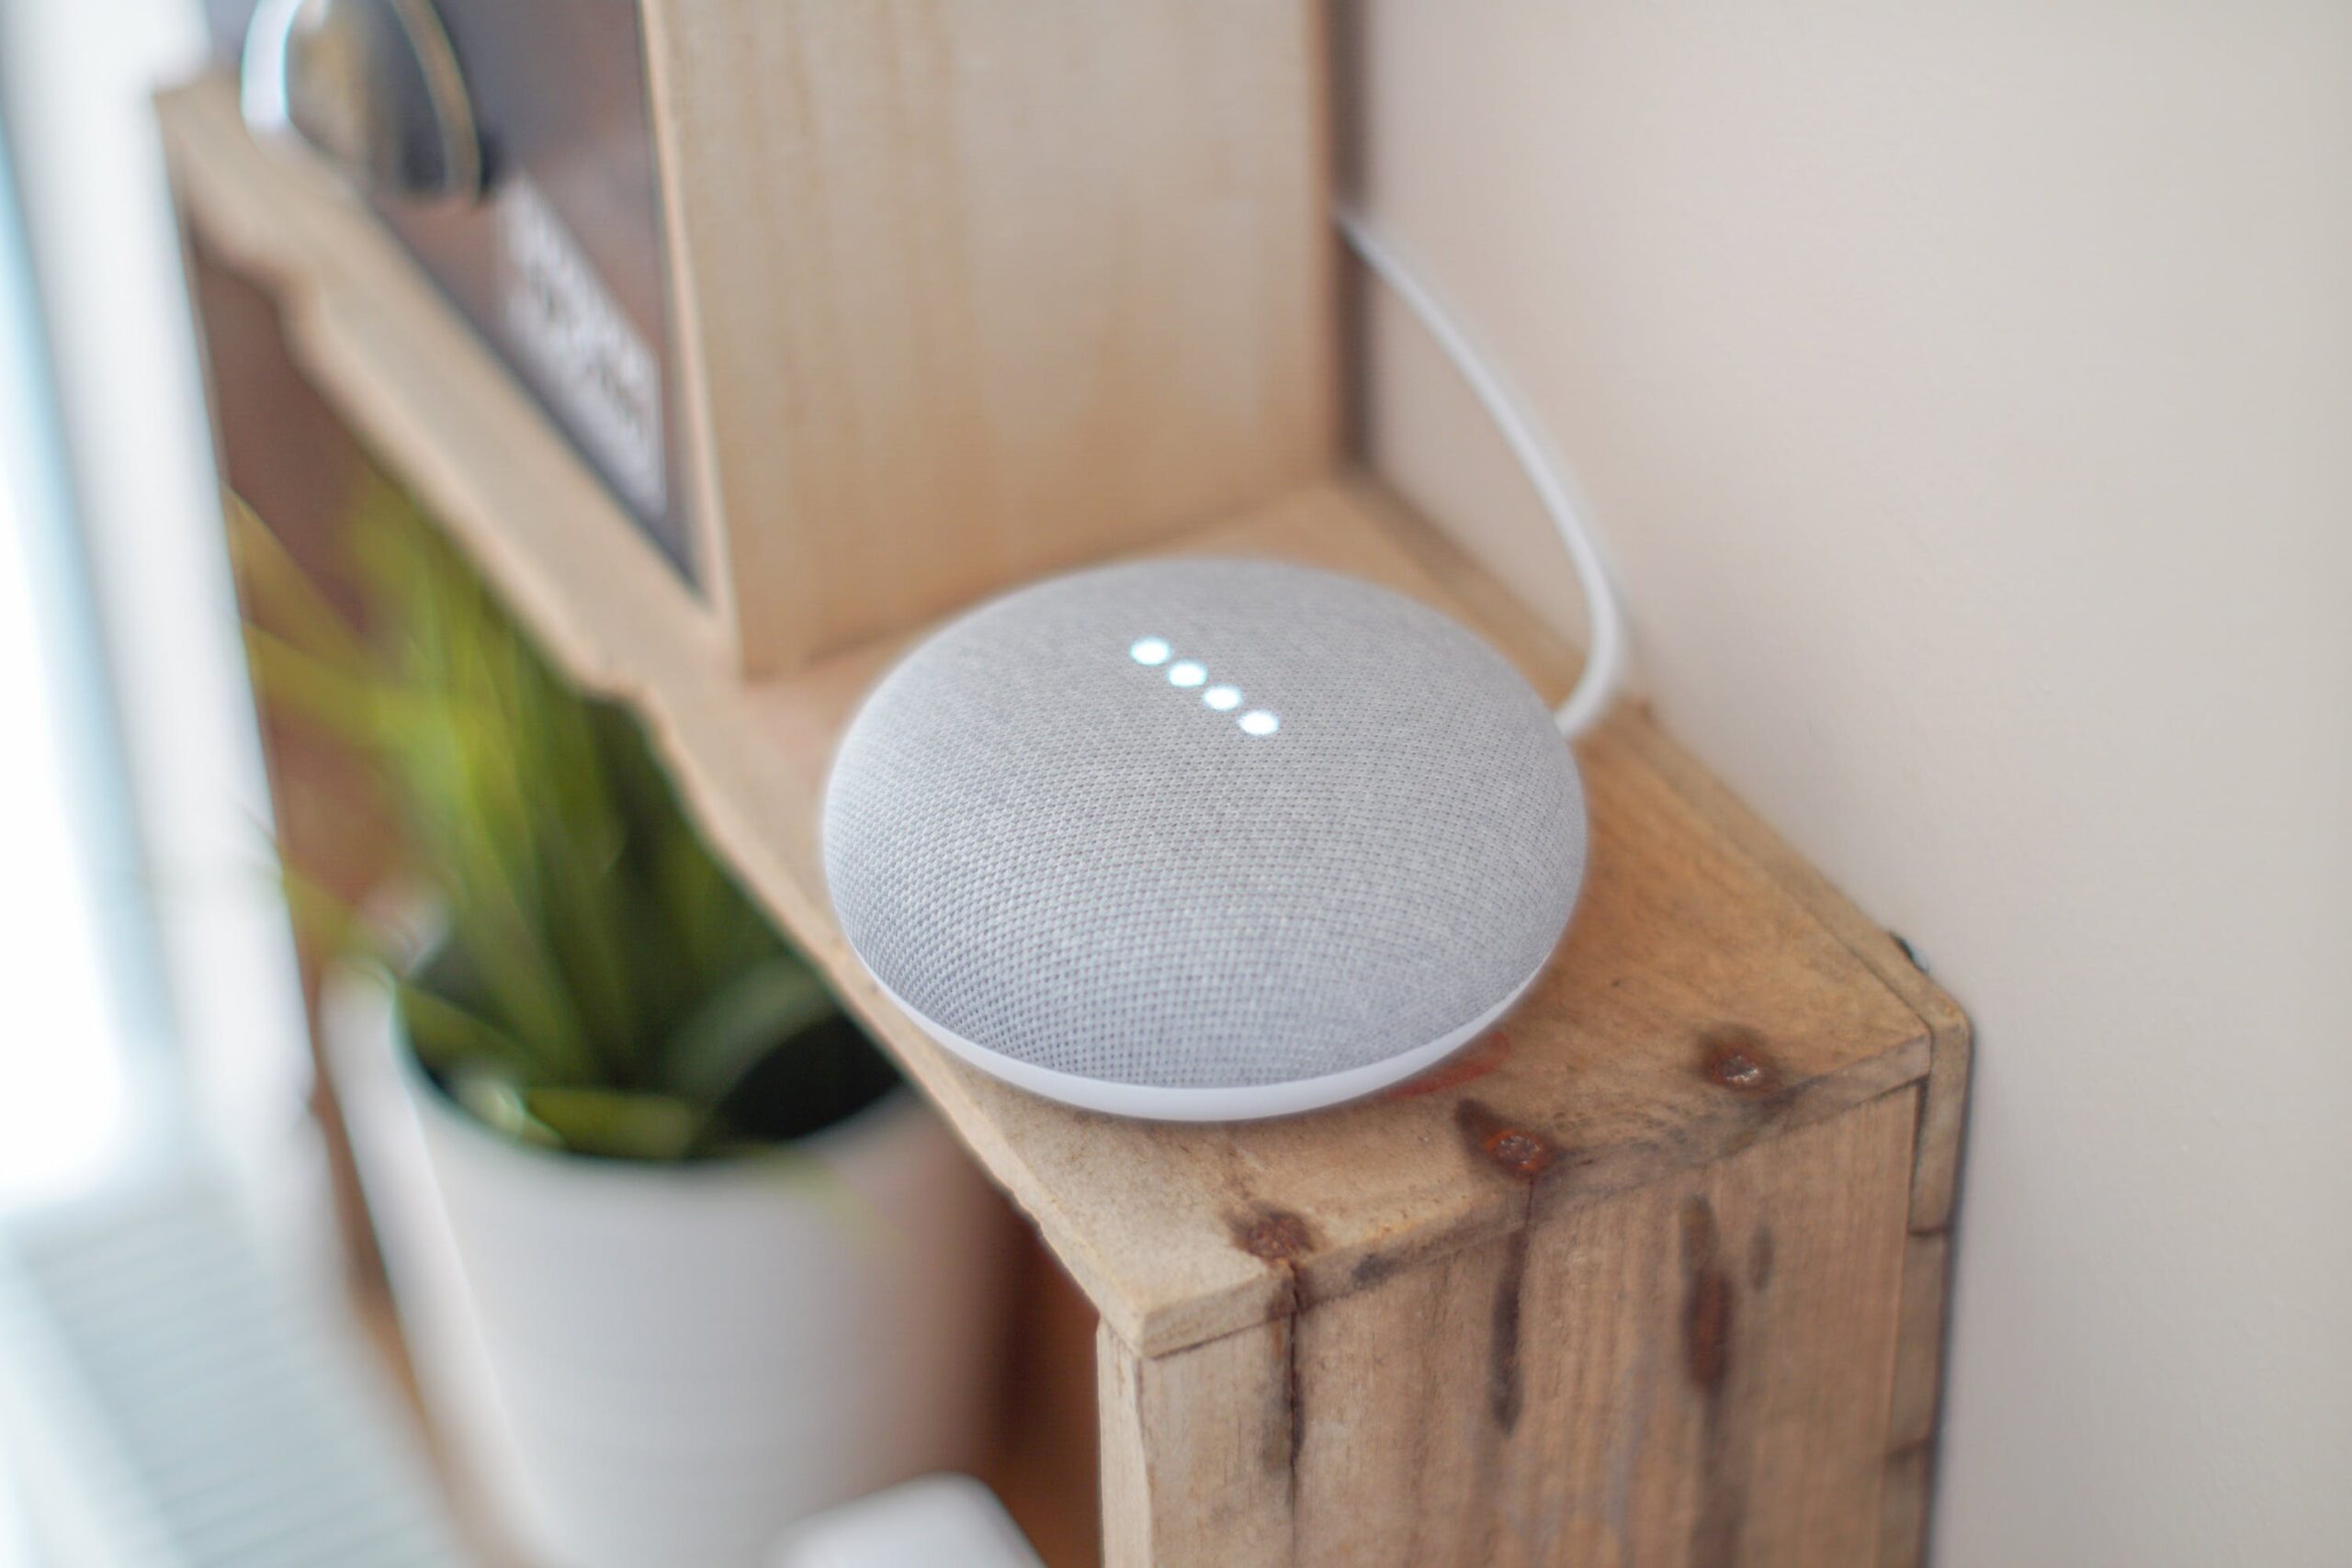 A smart speaker on a rustic wooden shelf, illuminated by soft light, showcasing modern smart home technology in a cozy setting.